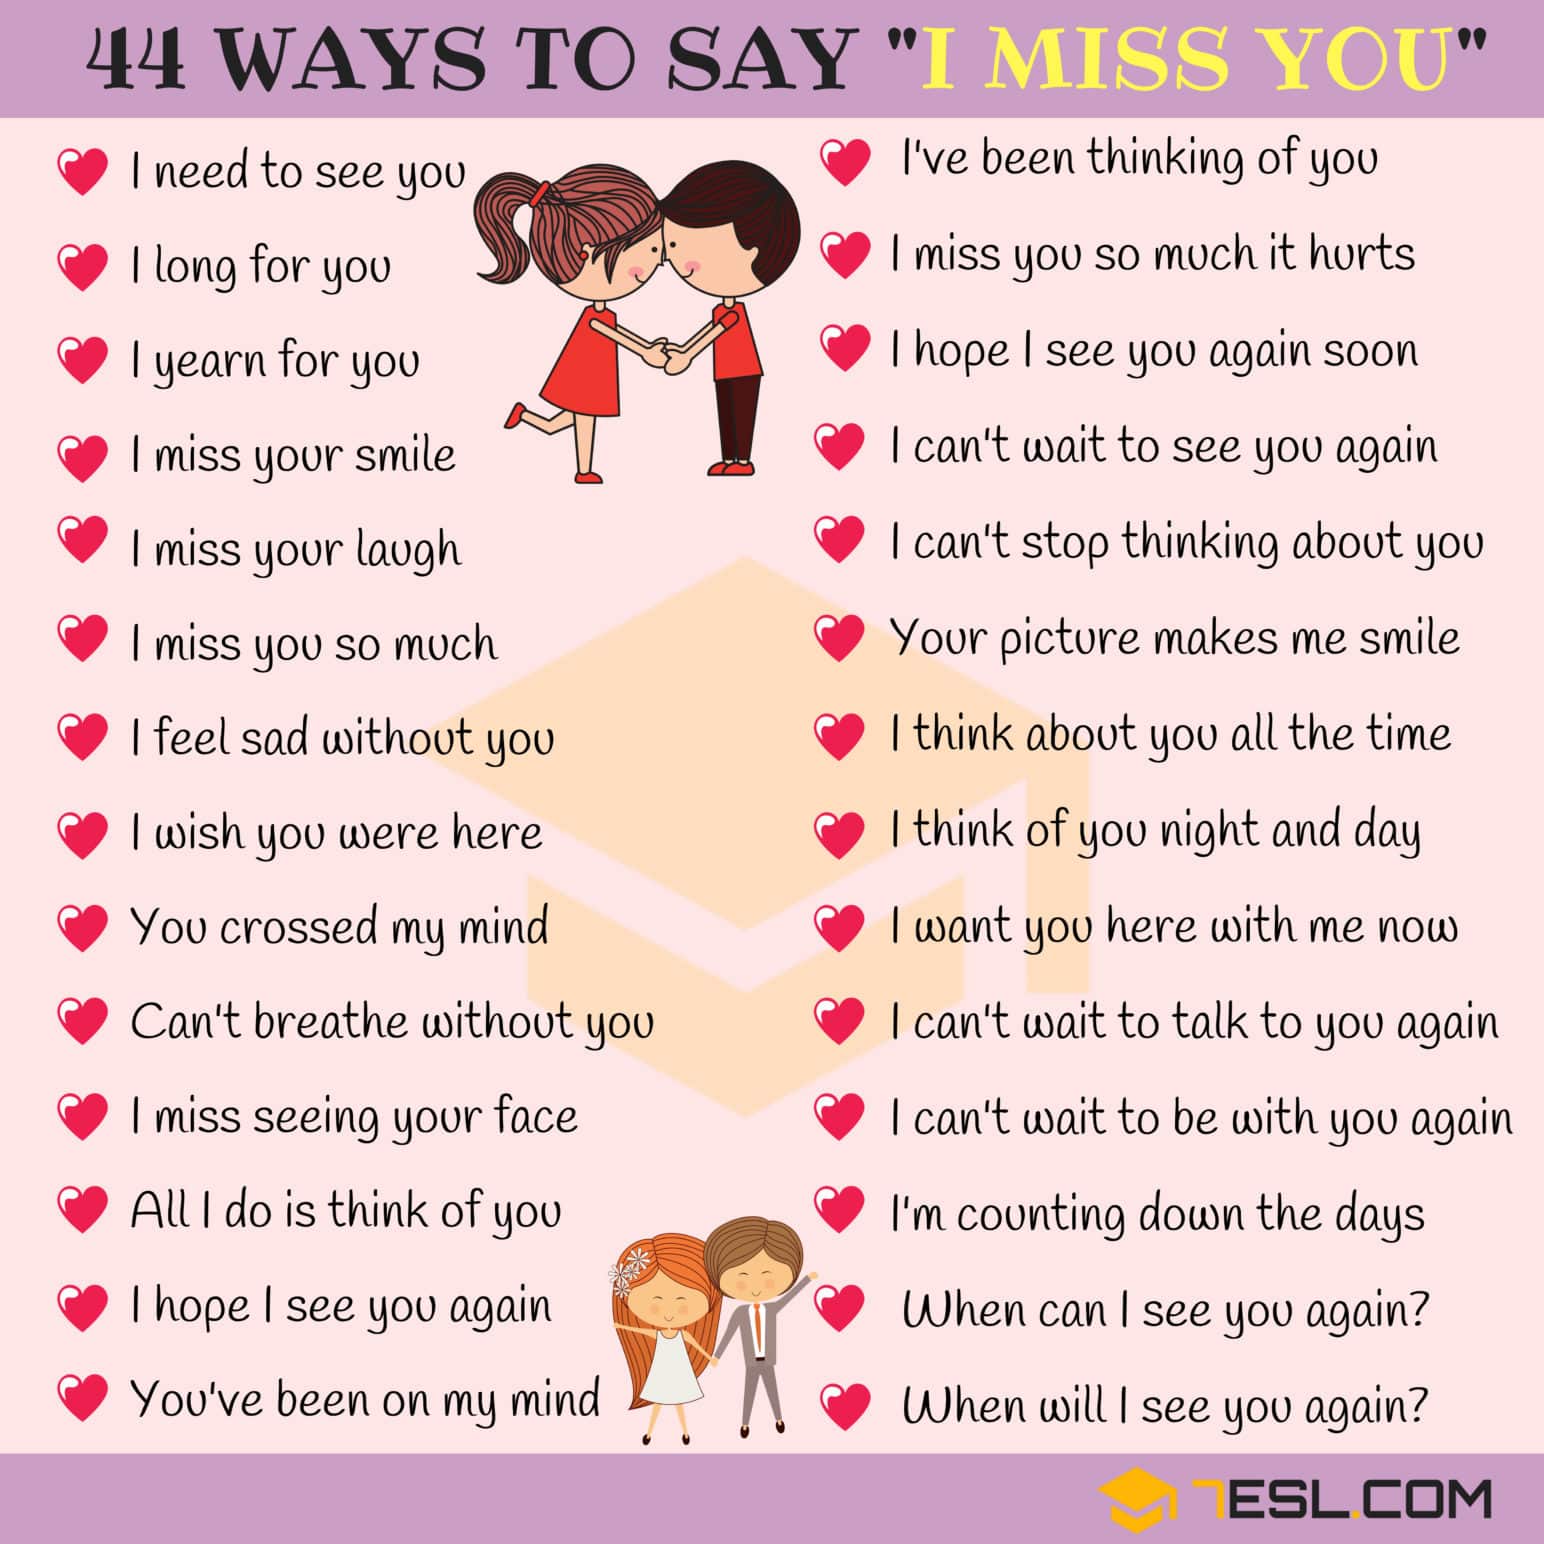 Ways to Say I MISS YOU